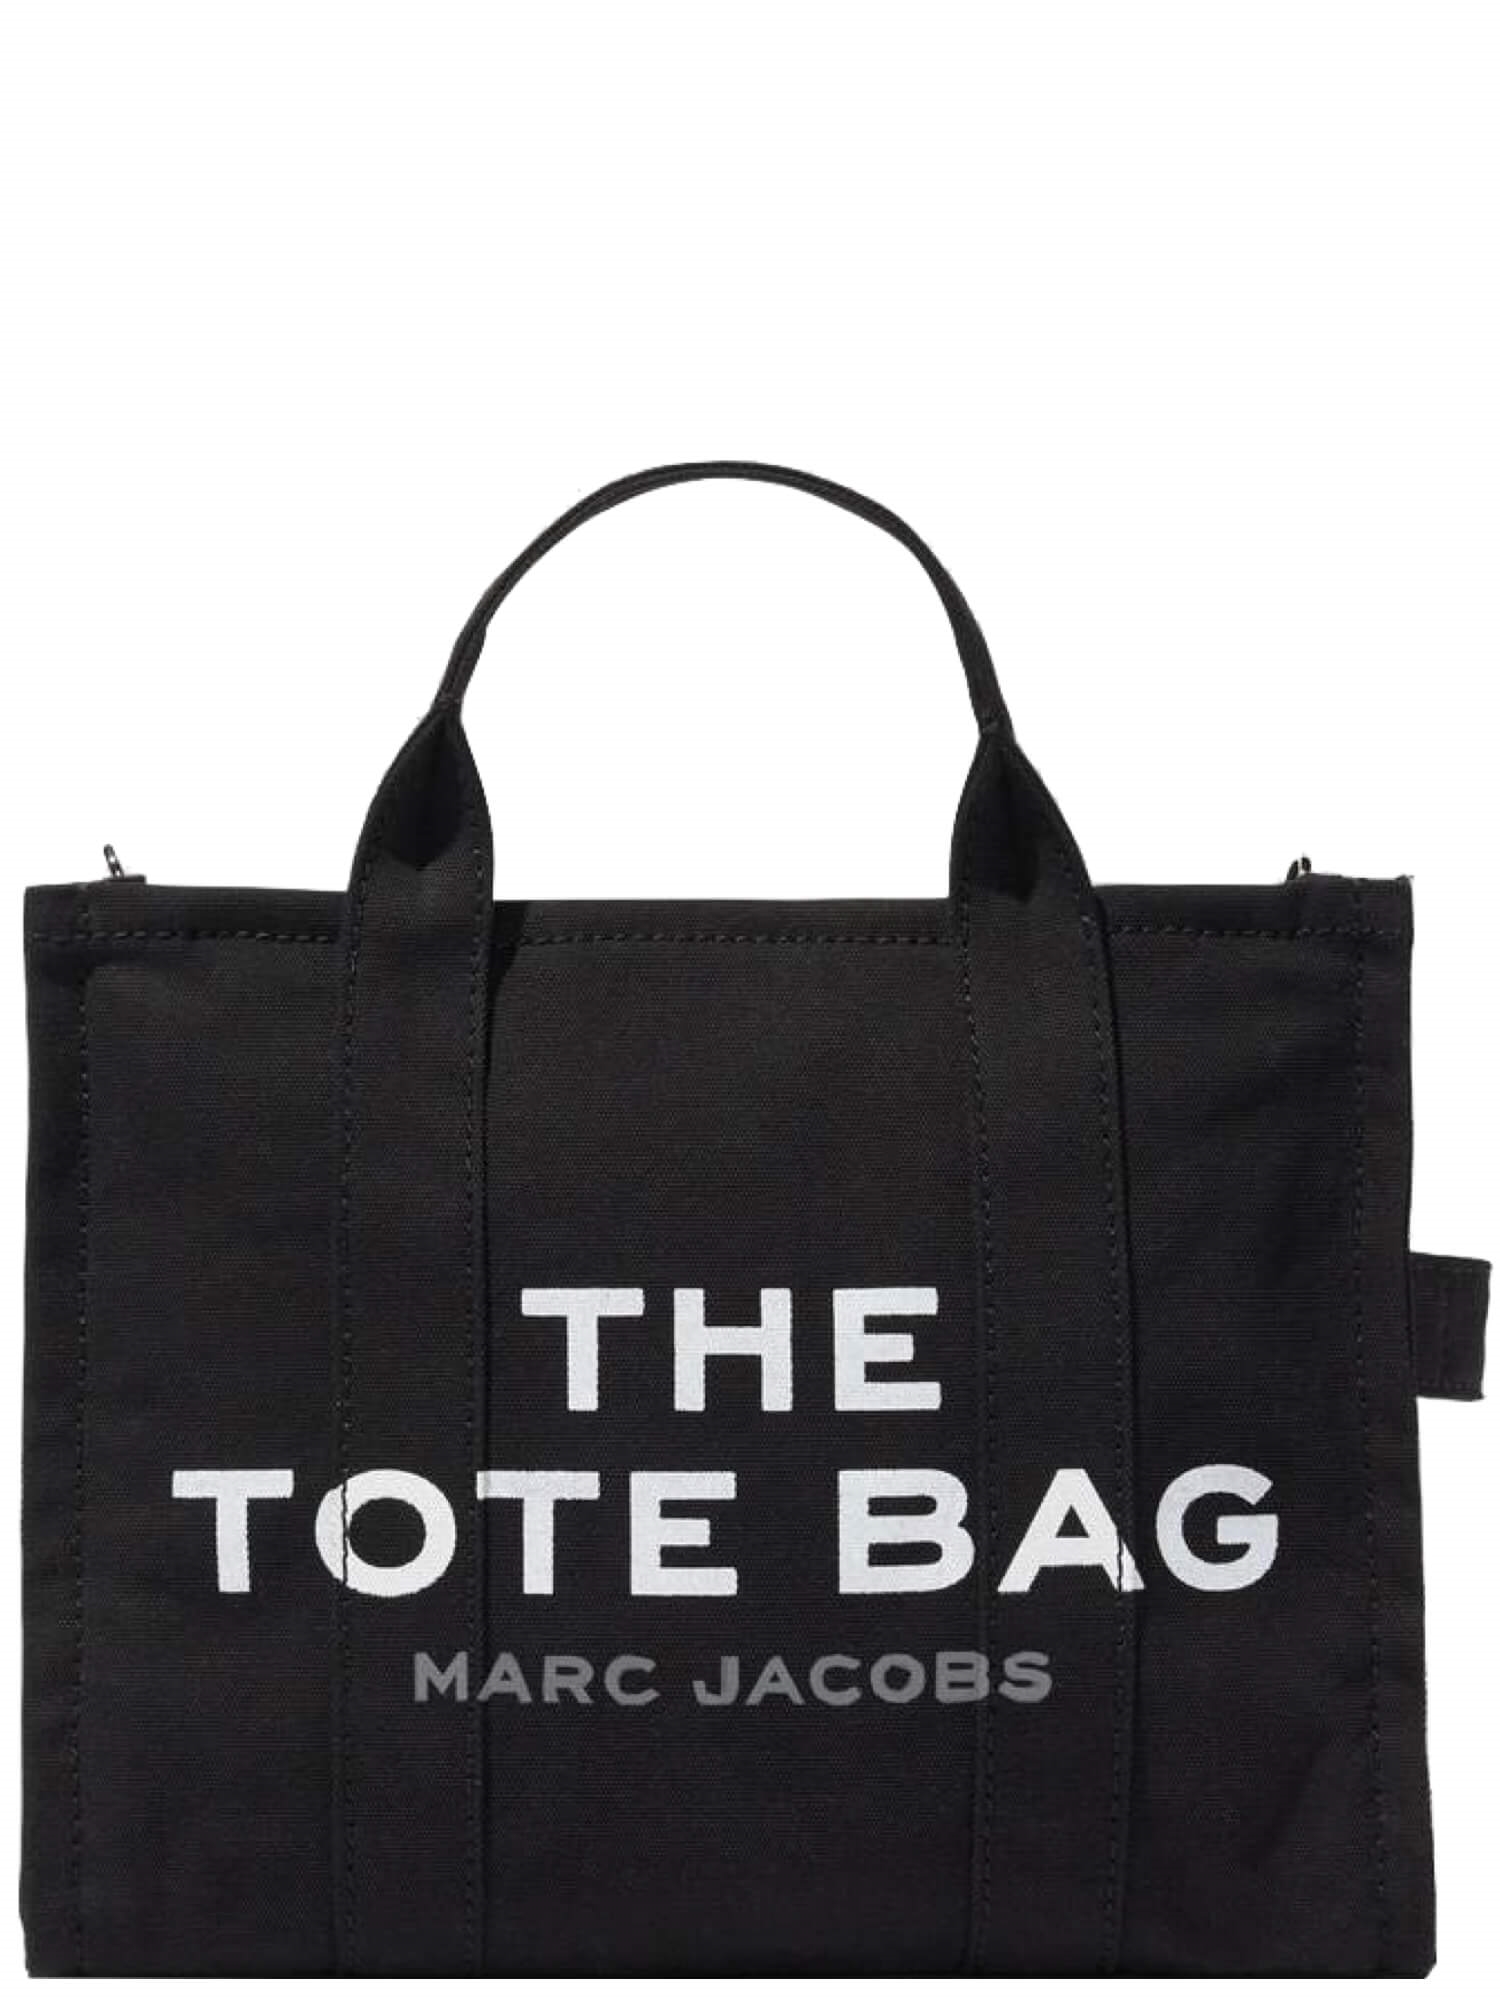 Marc Jacobs Small Tote Bag, Sort Shop her